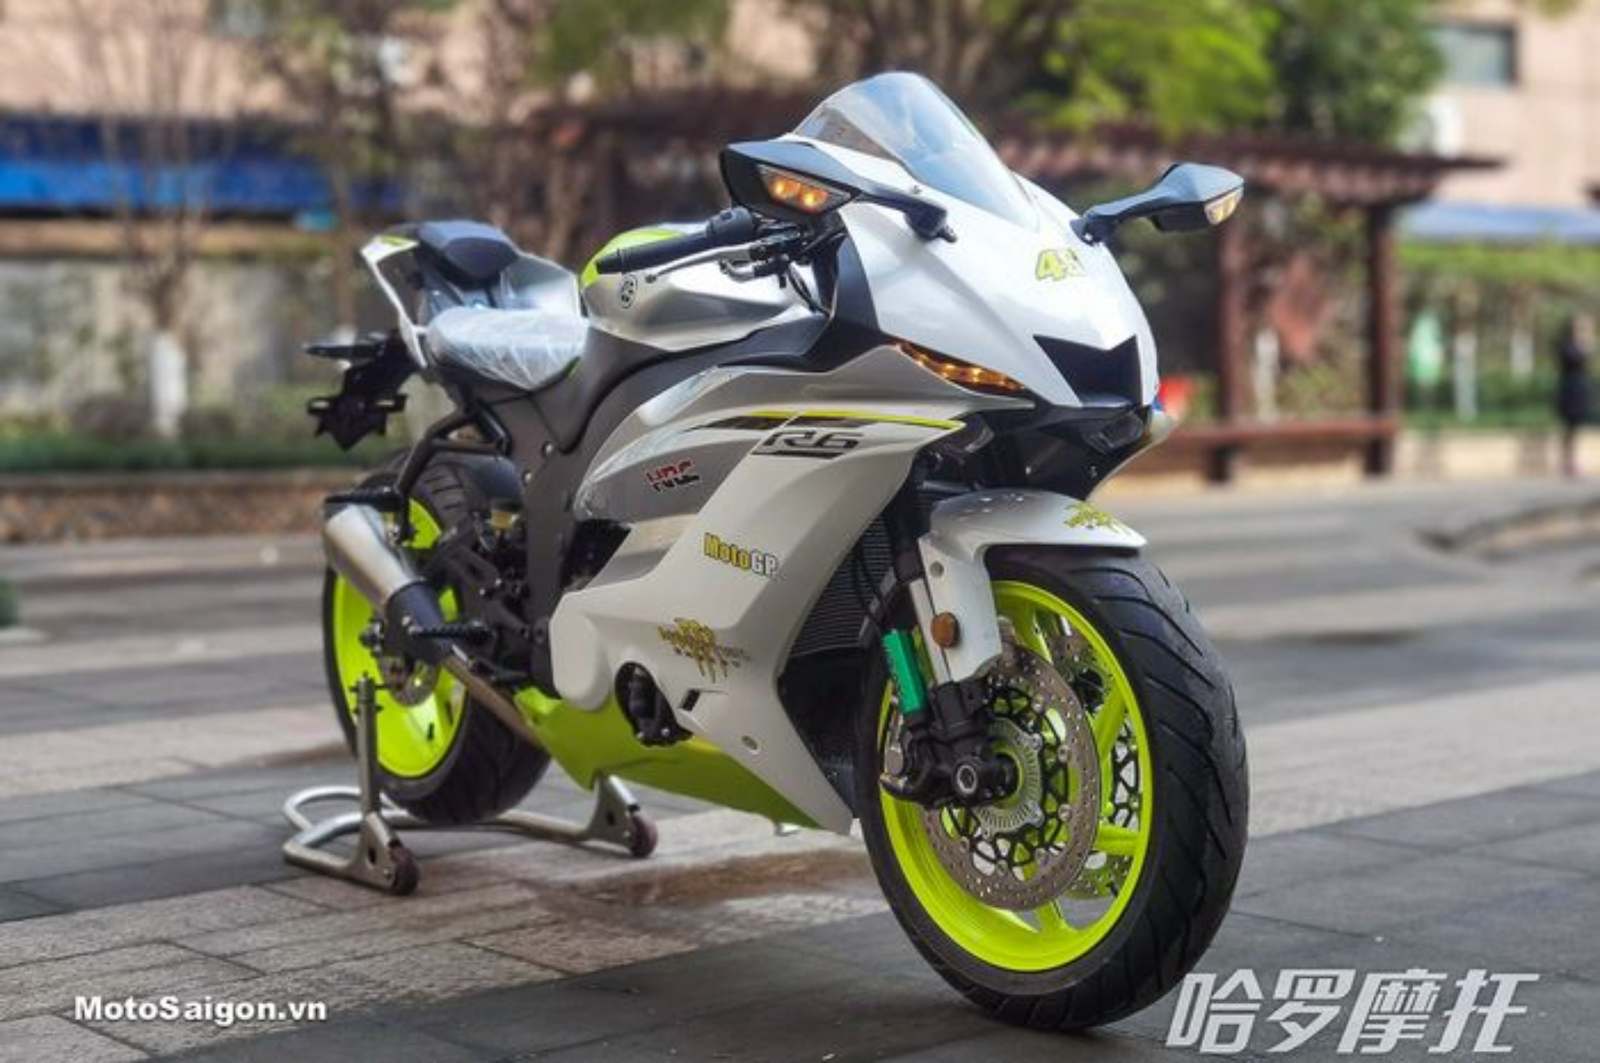 Look How The Chinese Massacred The Mighty Yamaha R6 With This